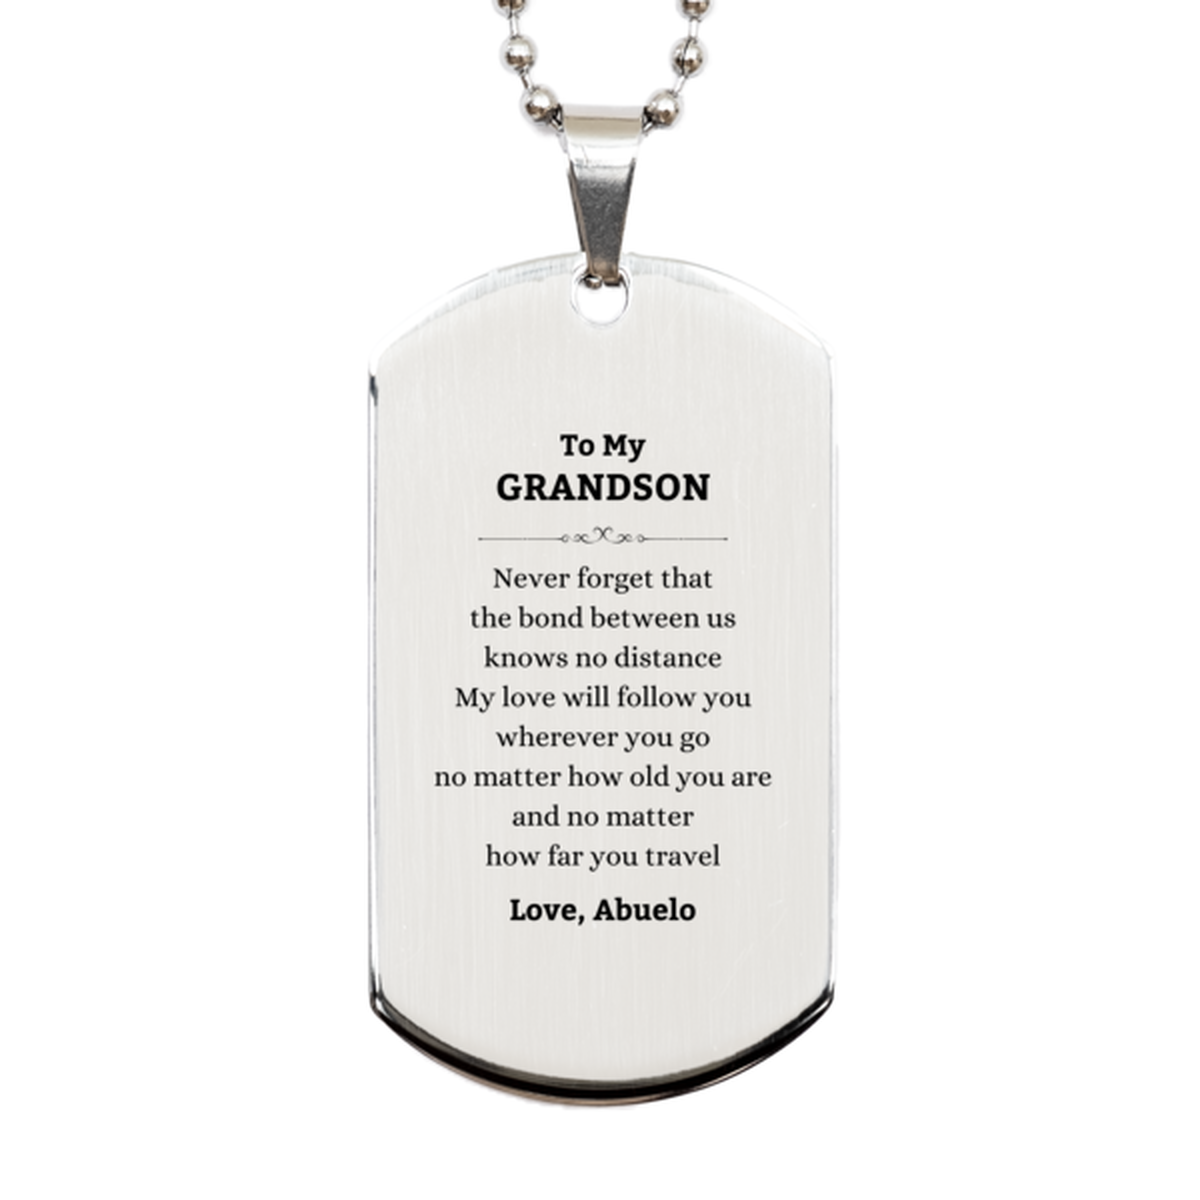 Grandson Birthday Gifts from Abuelo, Adjustable Silver Dog Tag for Grandson Christmas Graduation Unique Gifts Grandson Never forget that the bond between us knows no distance. Love, Abuelo